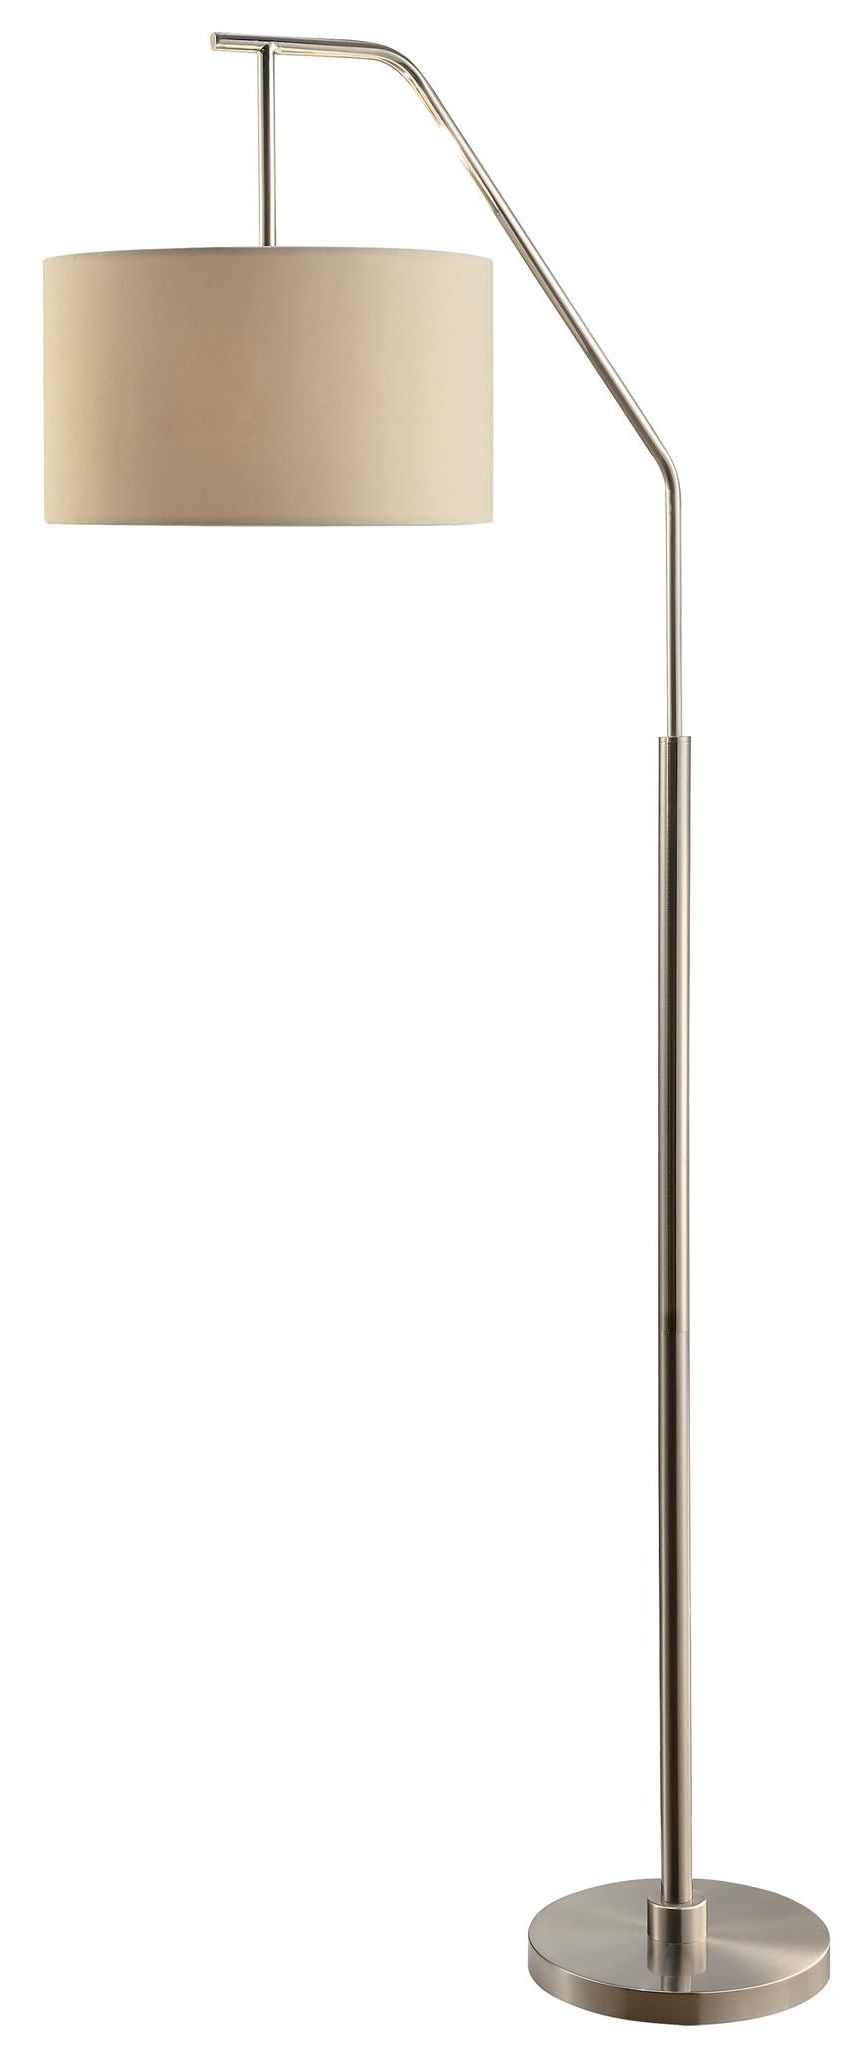 Dinsmore 72 Inch Floor Lamp, Brushed Nickel – Walmart Inside Most Recently Released 72 Inch Standing Lamps (View 1 of 10)